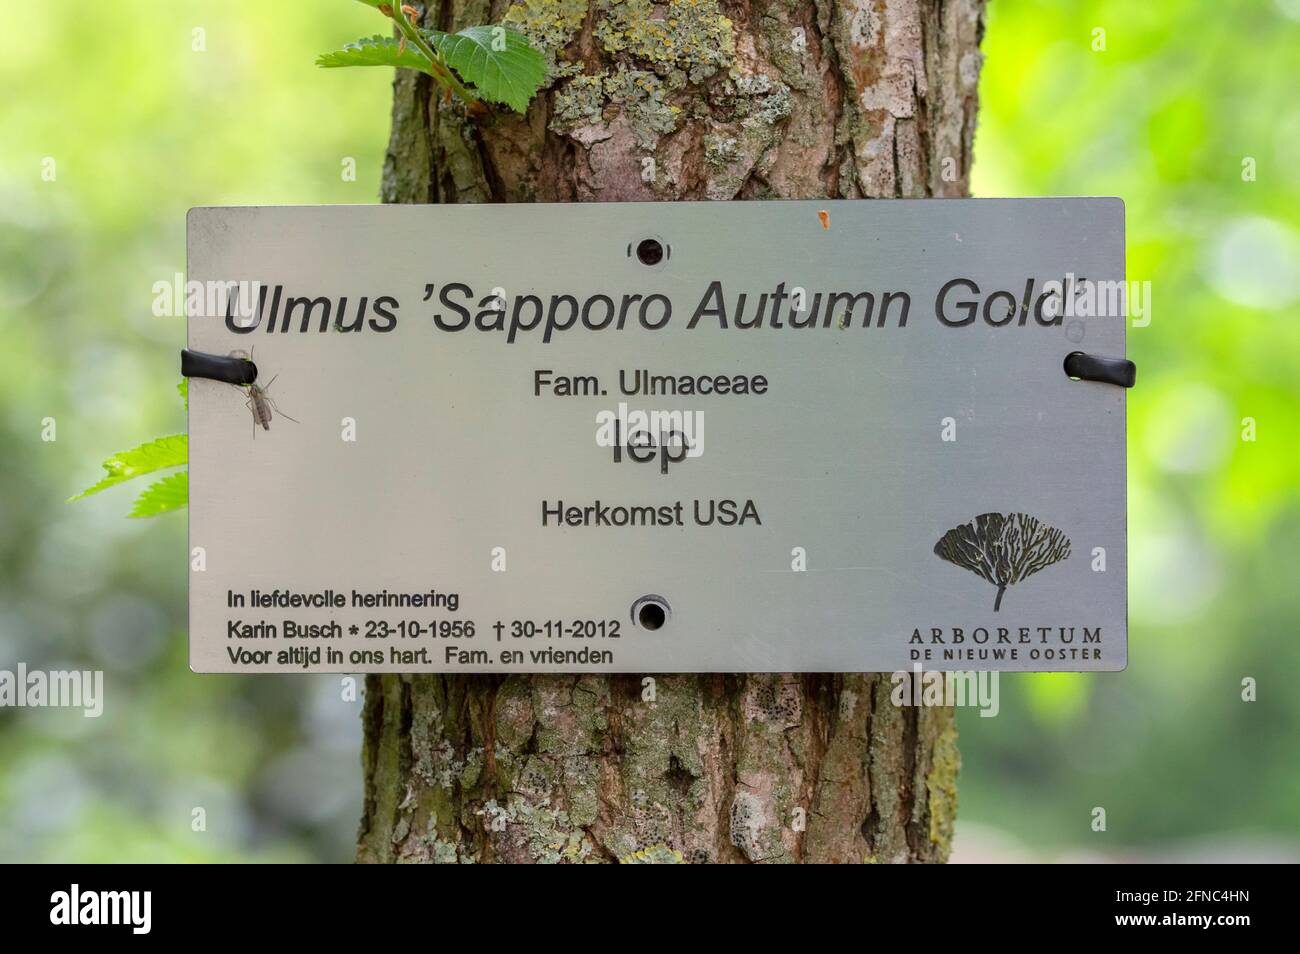 Sign Ulmus Sapporo Autumn Gold Tree At De Nieuwe Ooster At Amsterdam The Netherlands 15-4-2021 Stock Photo